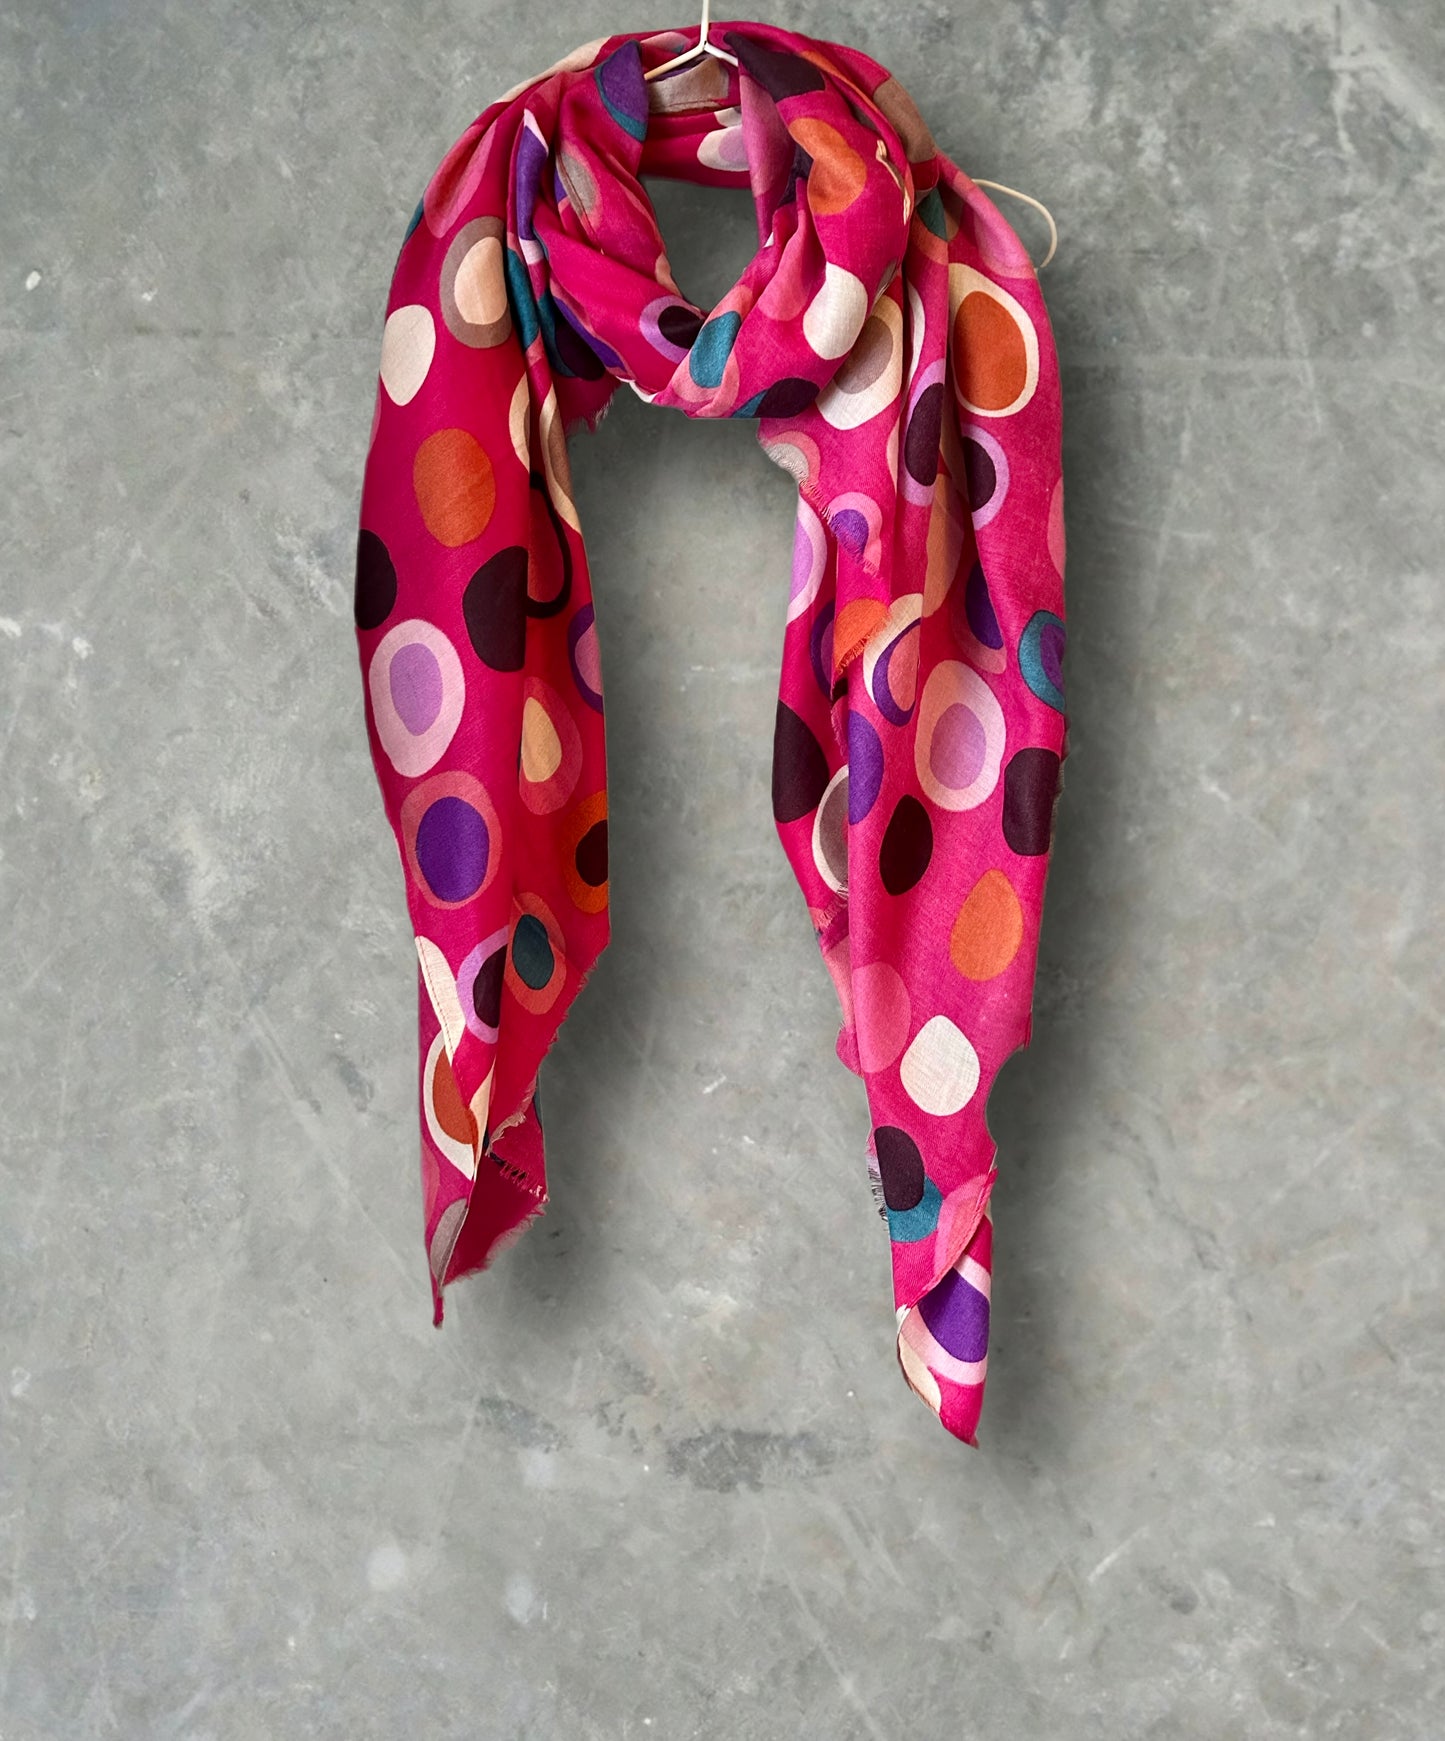 Multicolour Circle Pattern Fuchsia Pink Cotton Scarf,Women Scarf,Autumn Winter Scarf,Gifts for Her,Mom,Gifts for Birthday,Christmas.